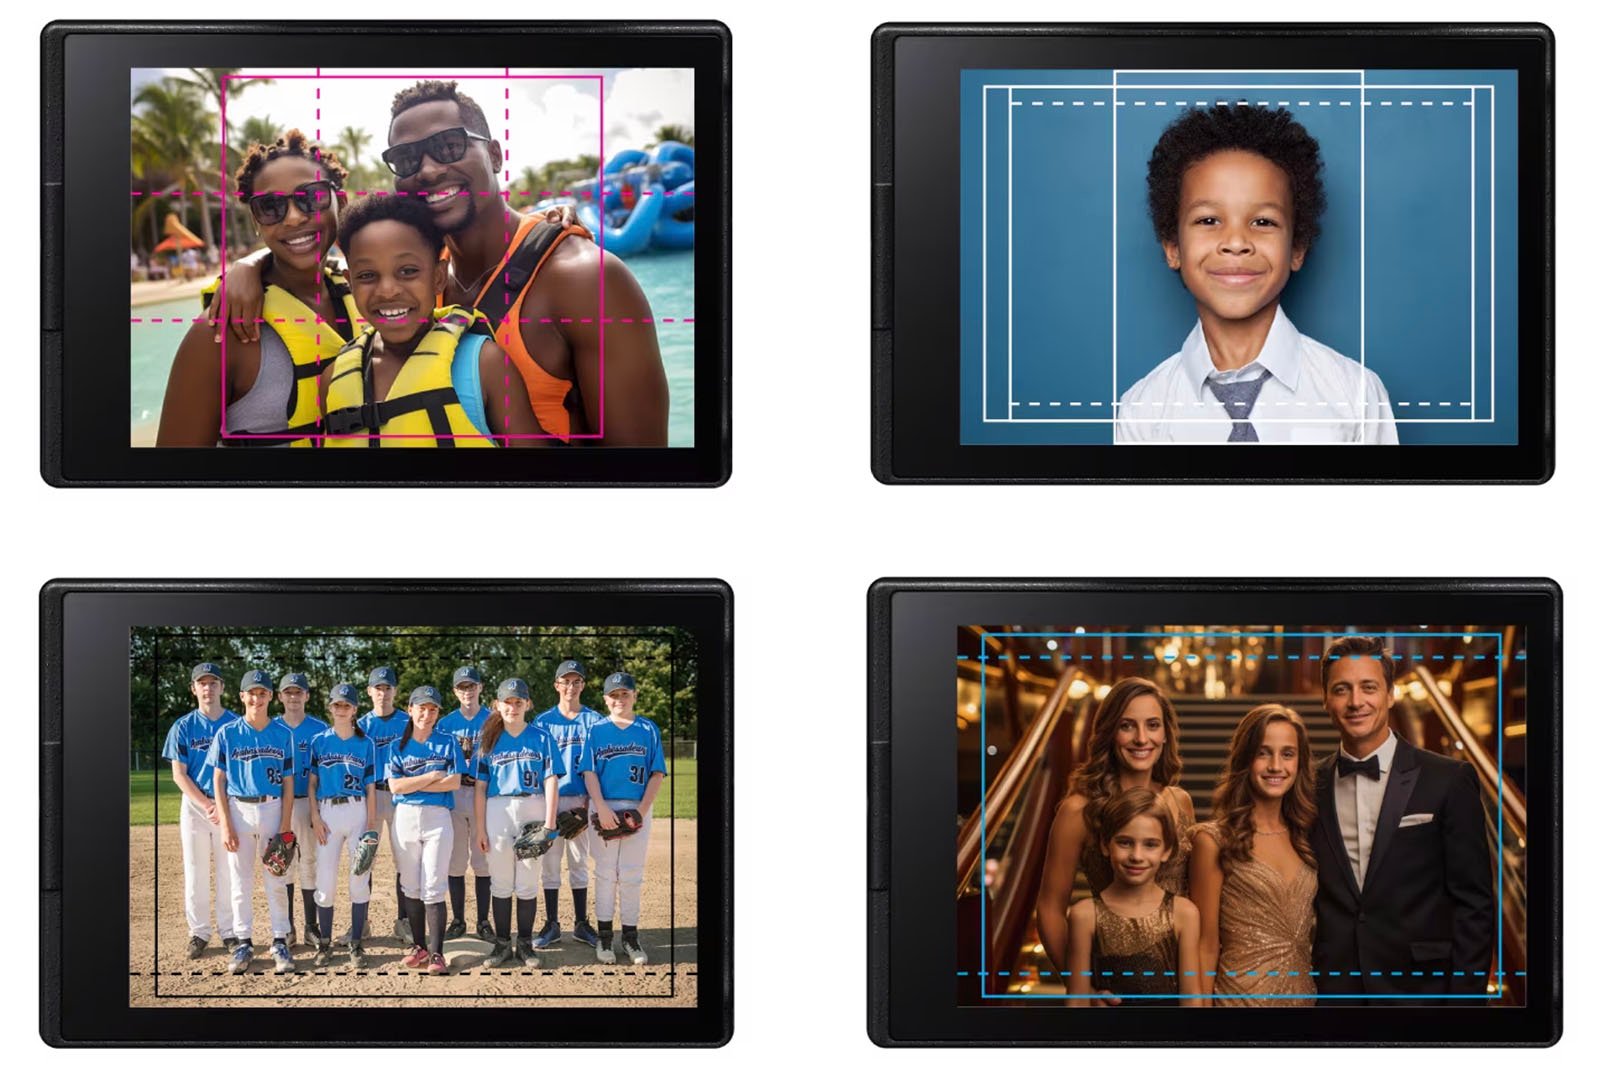 Four framed photos displayed on tablets: a happy black family at an amusement park, a black boy in a school uniform, a baseball team posing on a field, and a smartly dressed white family at a formal event.